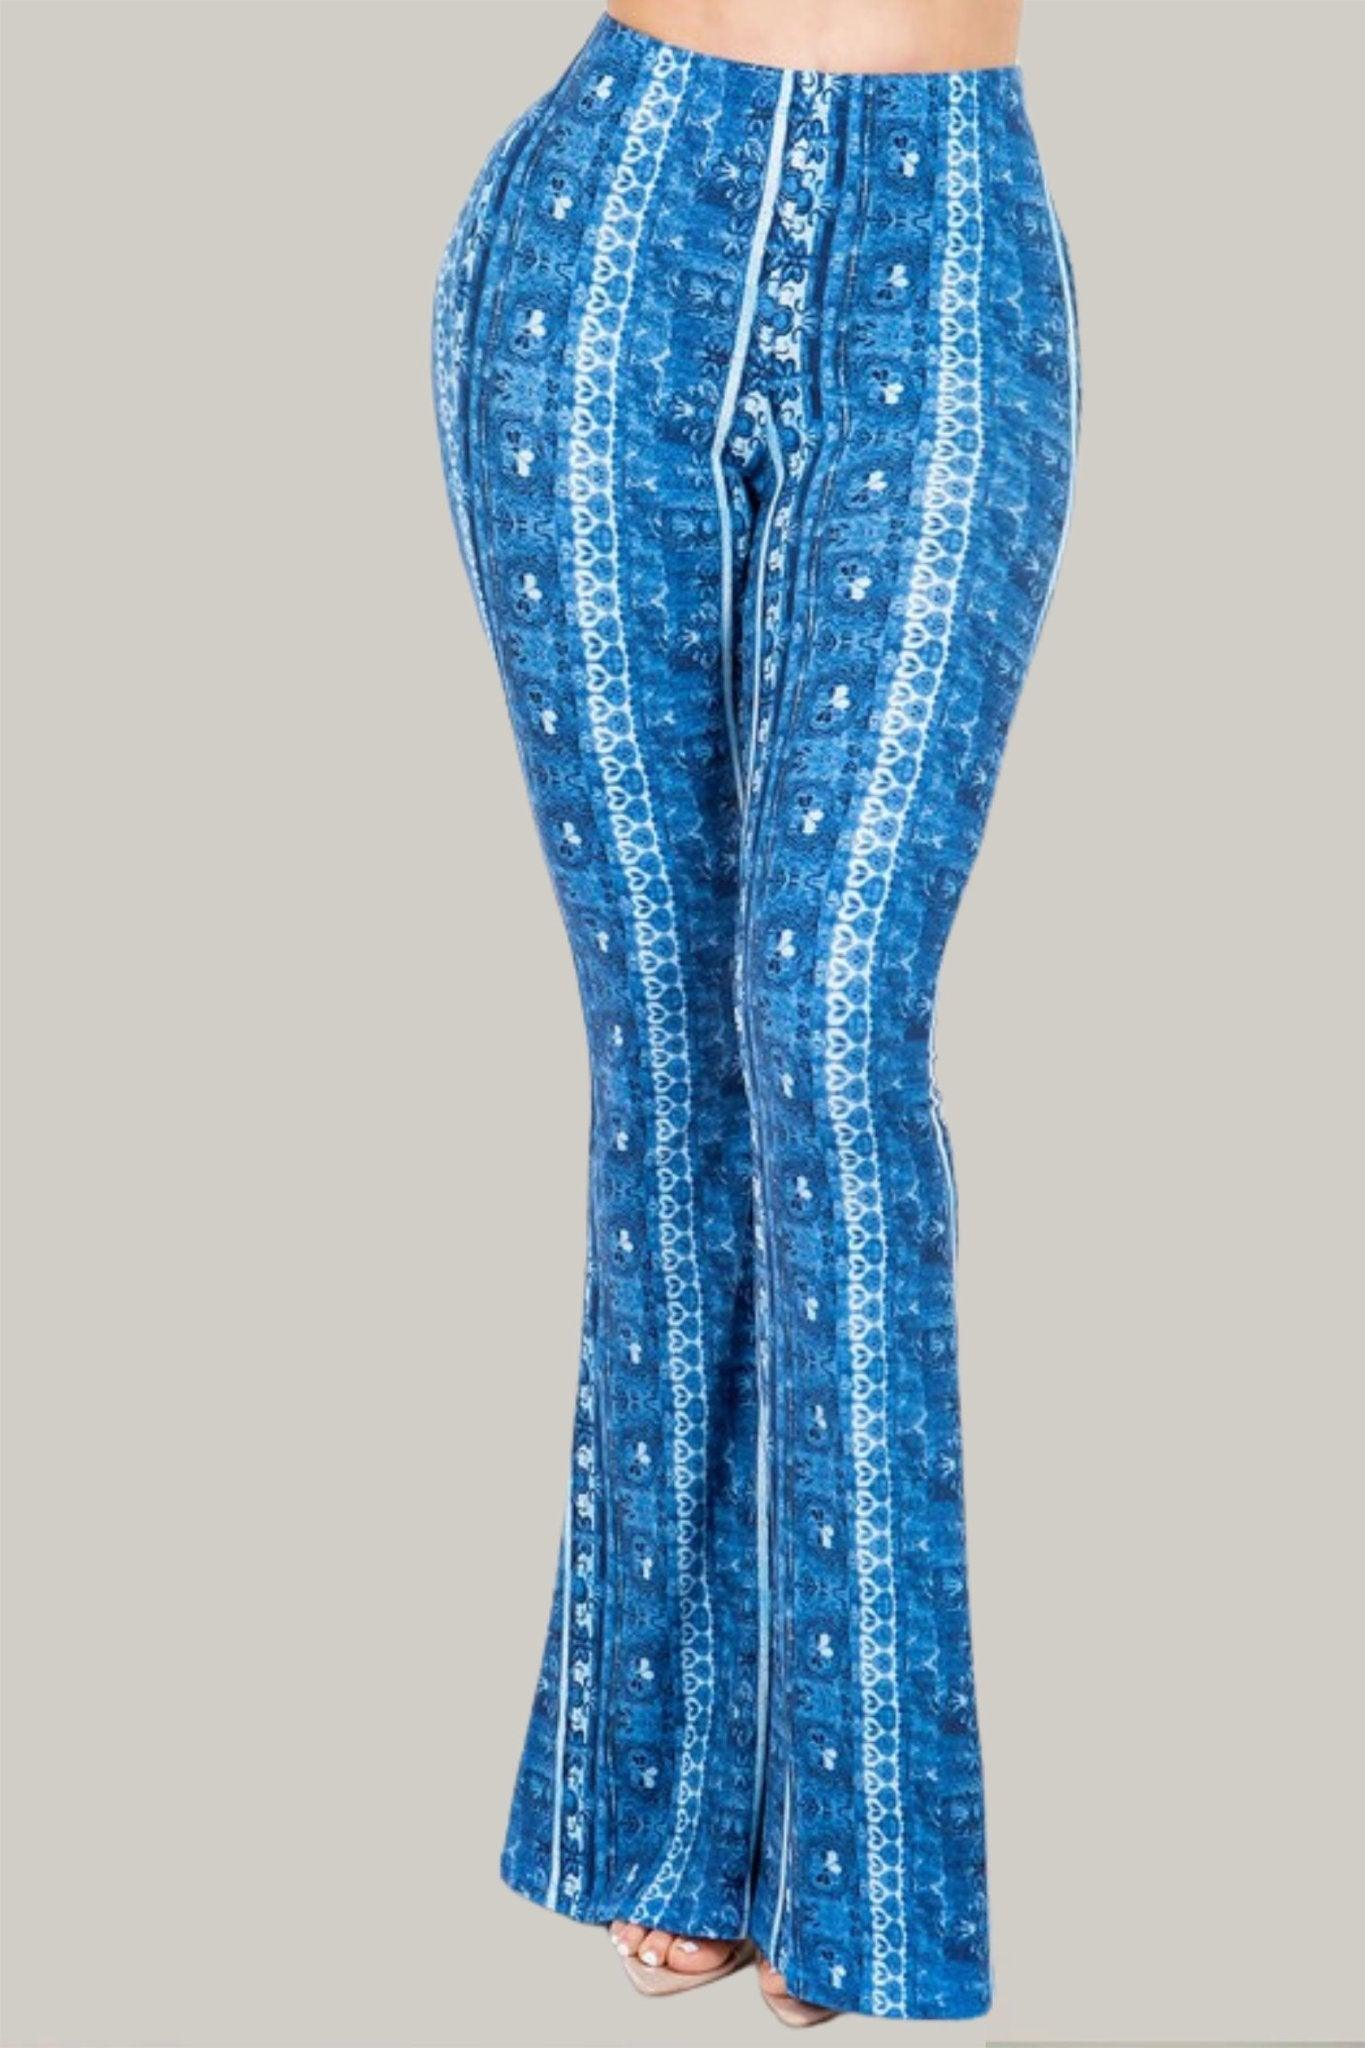 Boho Floral Printed Flared Pants - MY SEXY STYLES